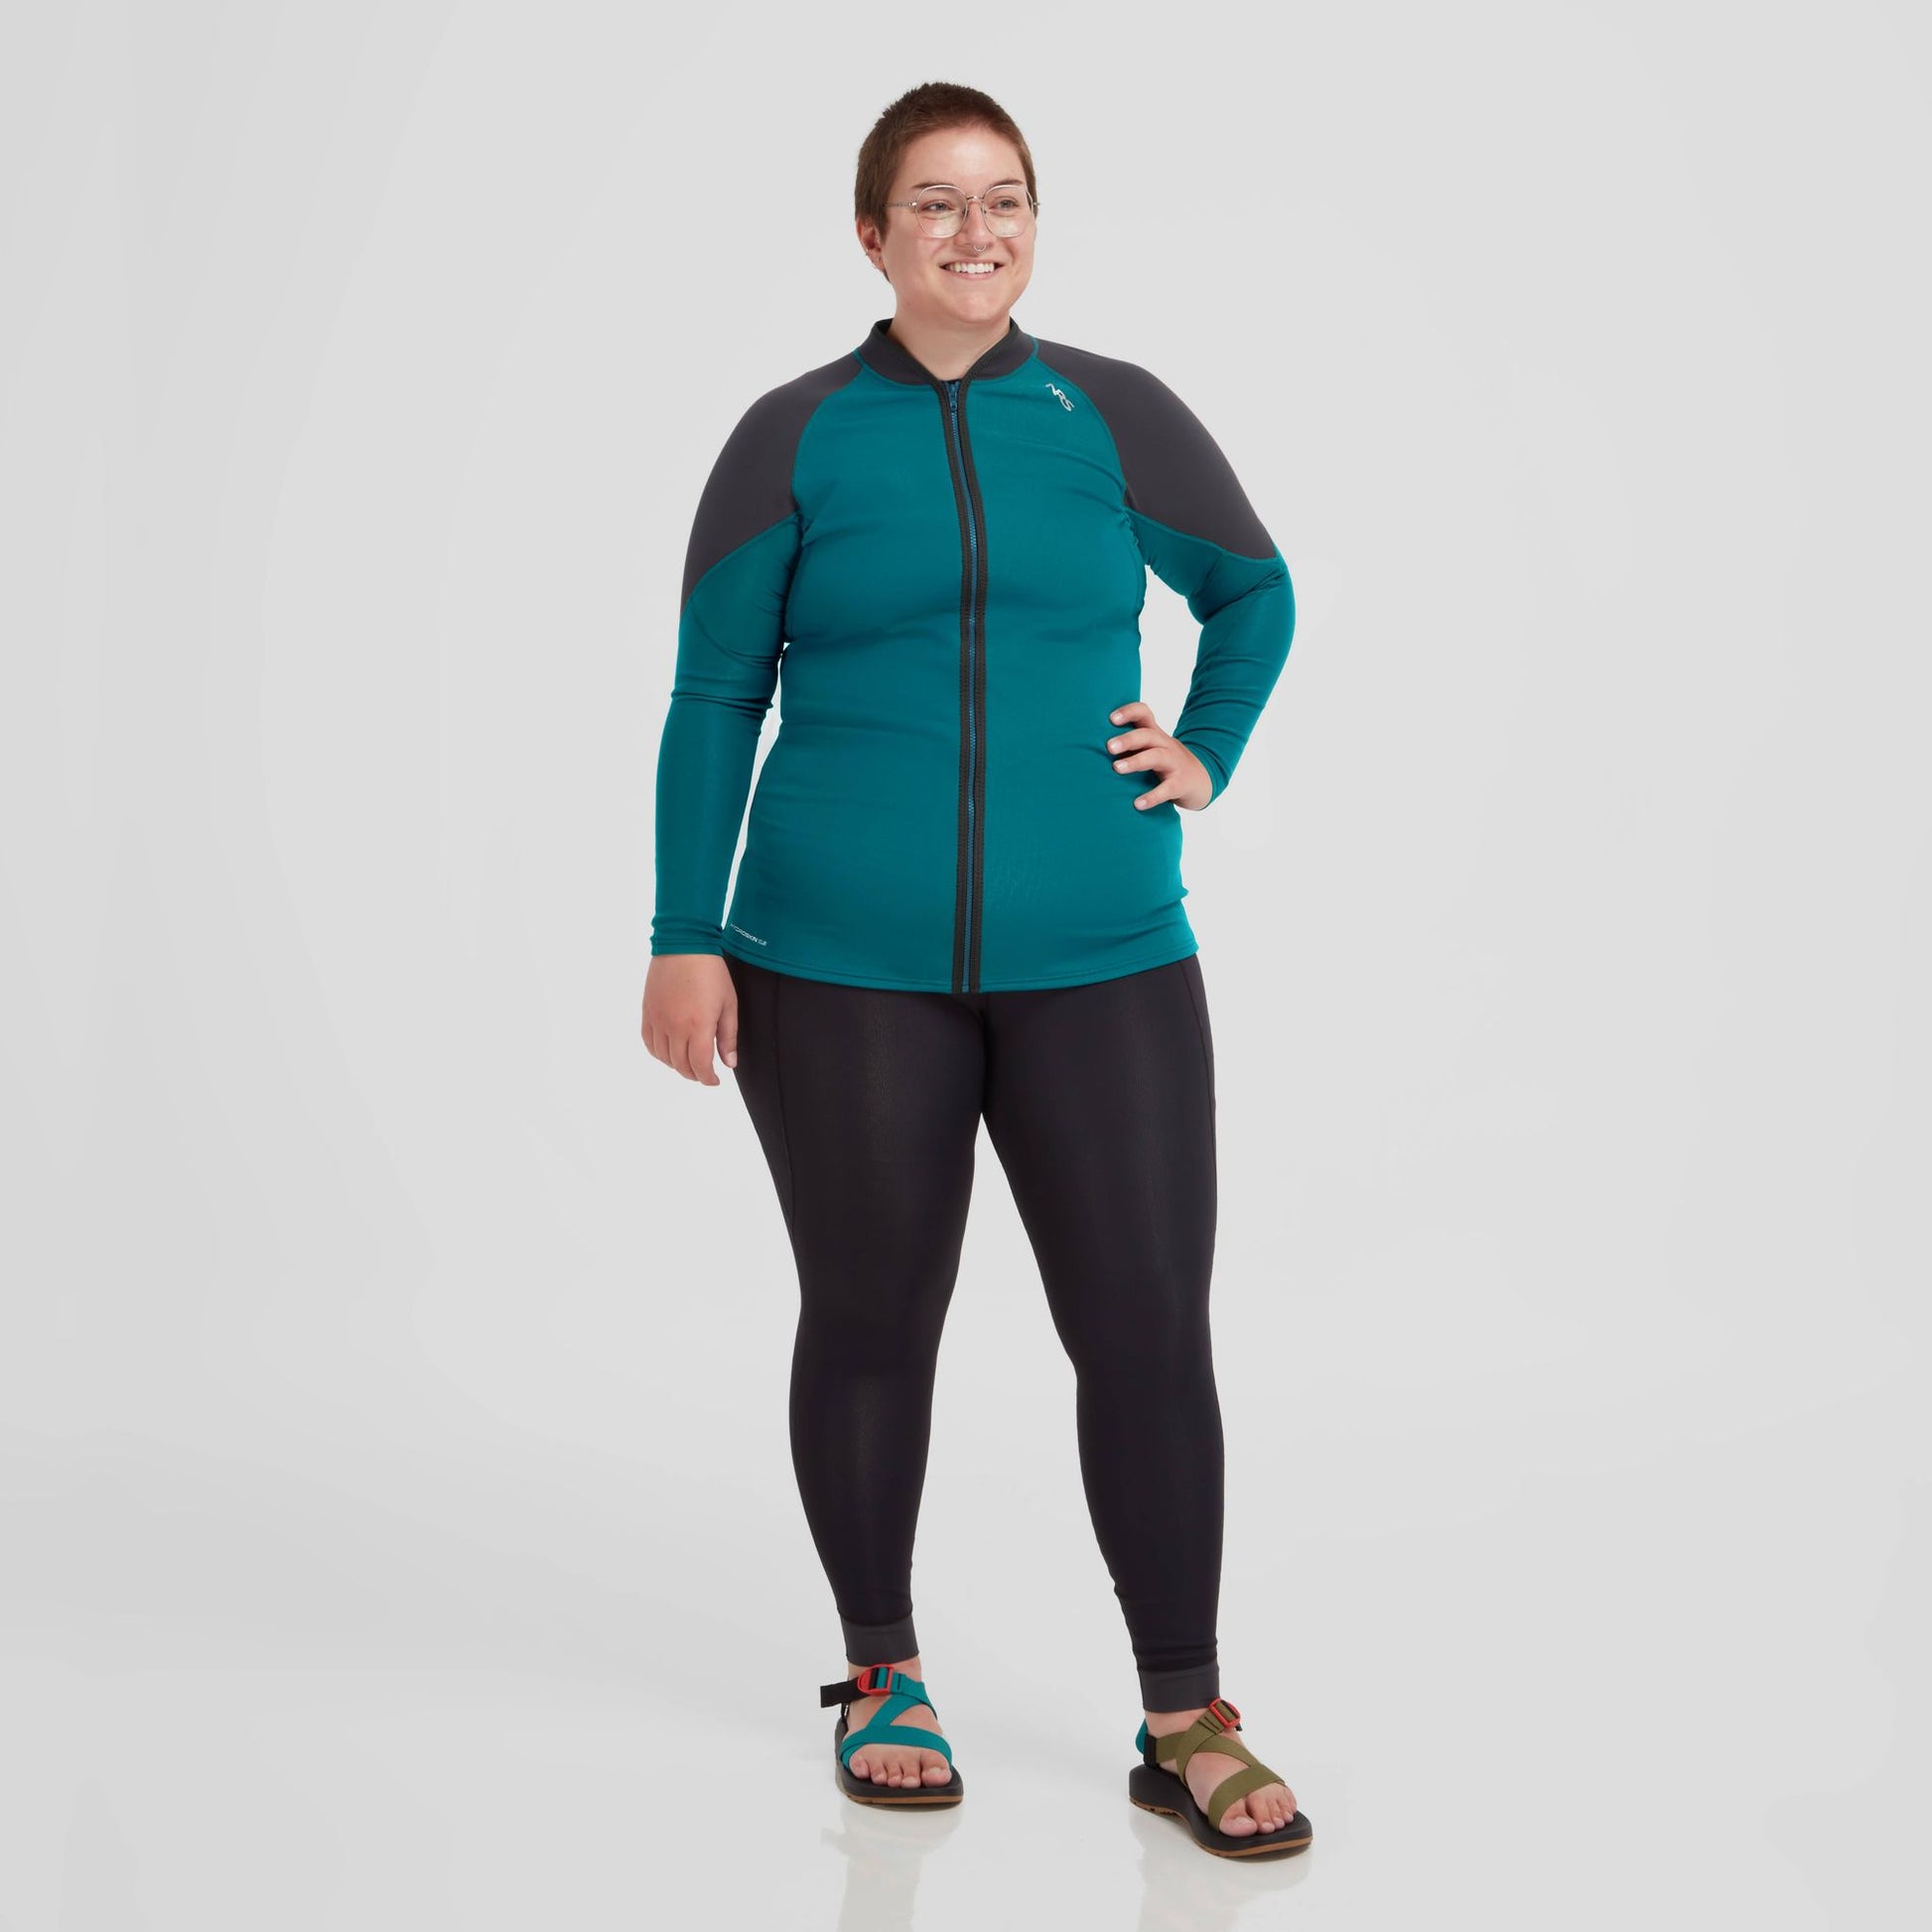 A woman donning a teal and black Hydroskin 0.5 Jacket - Women's from NRS, and leggings, part of her layering arsenal for outdoor activities.